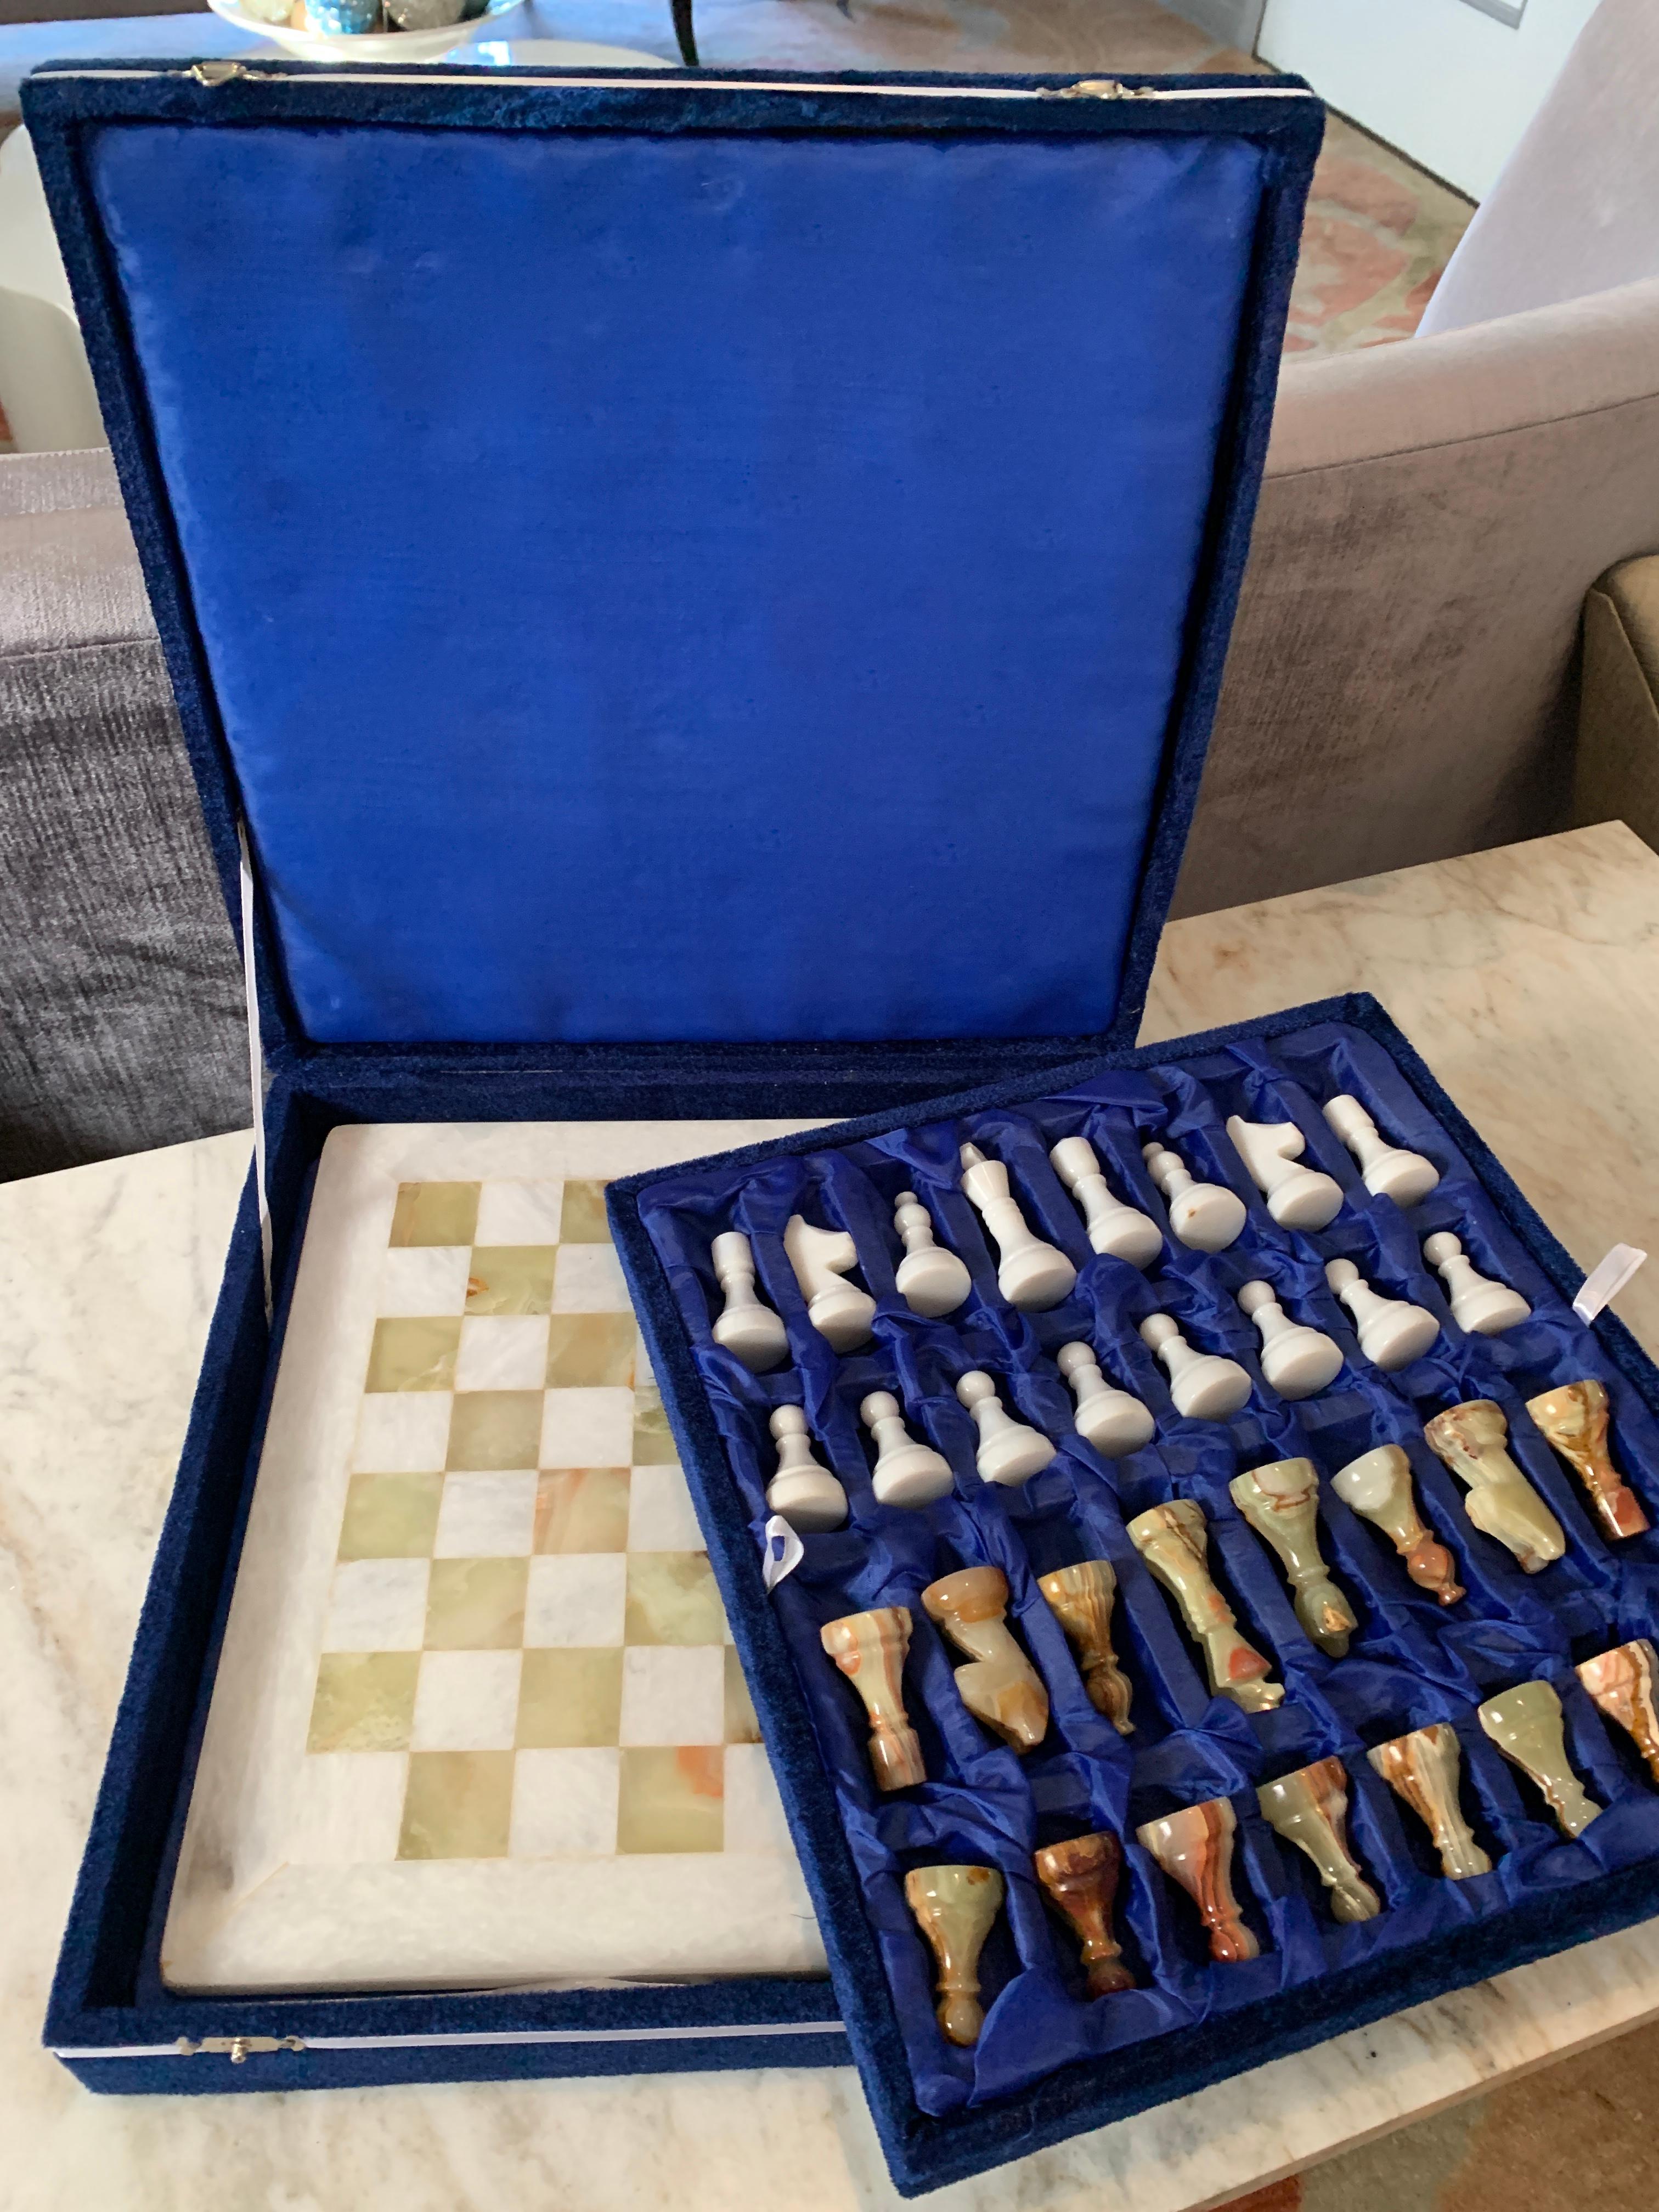 A completely handmade set of marble and onyx chess pieces and marble board, in handmade box. The decorative box that is included has been handmade of velvet and paper, a wonderful gift, family heirloom or the perfect travel chess set.

Measures: